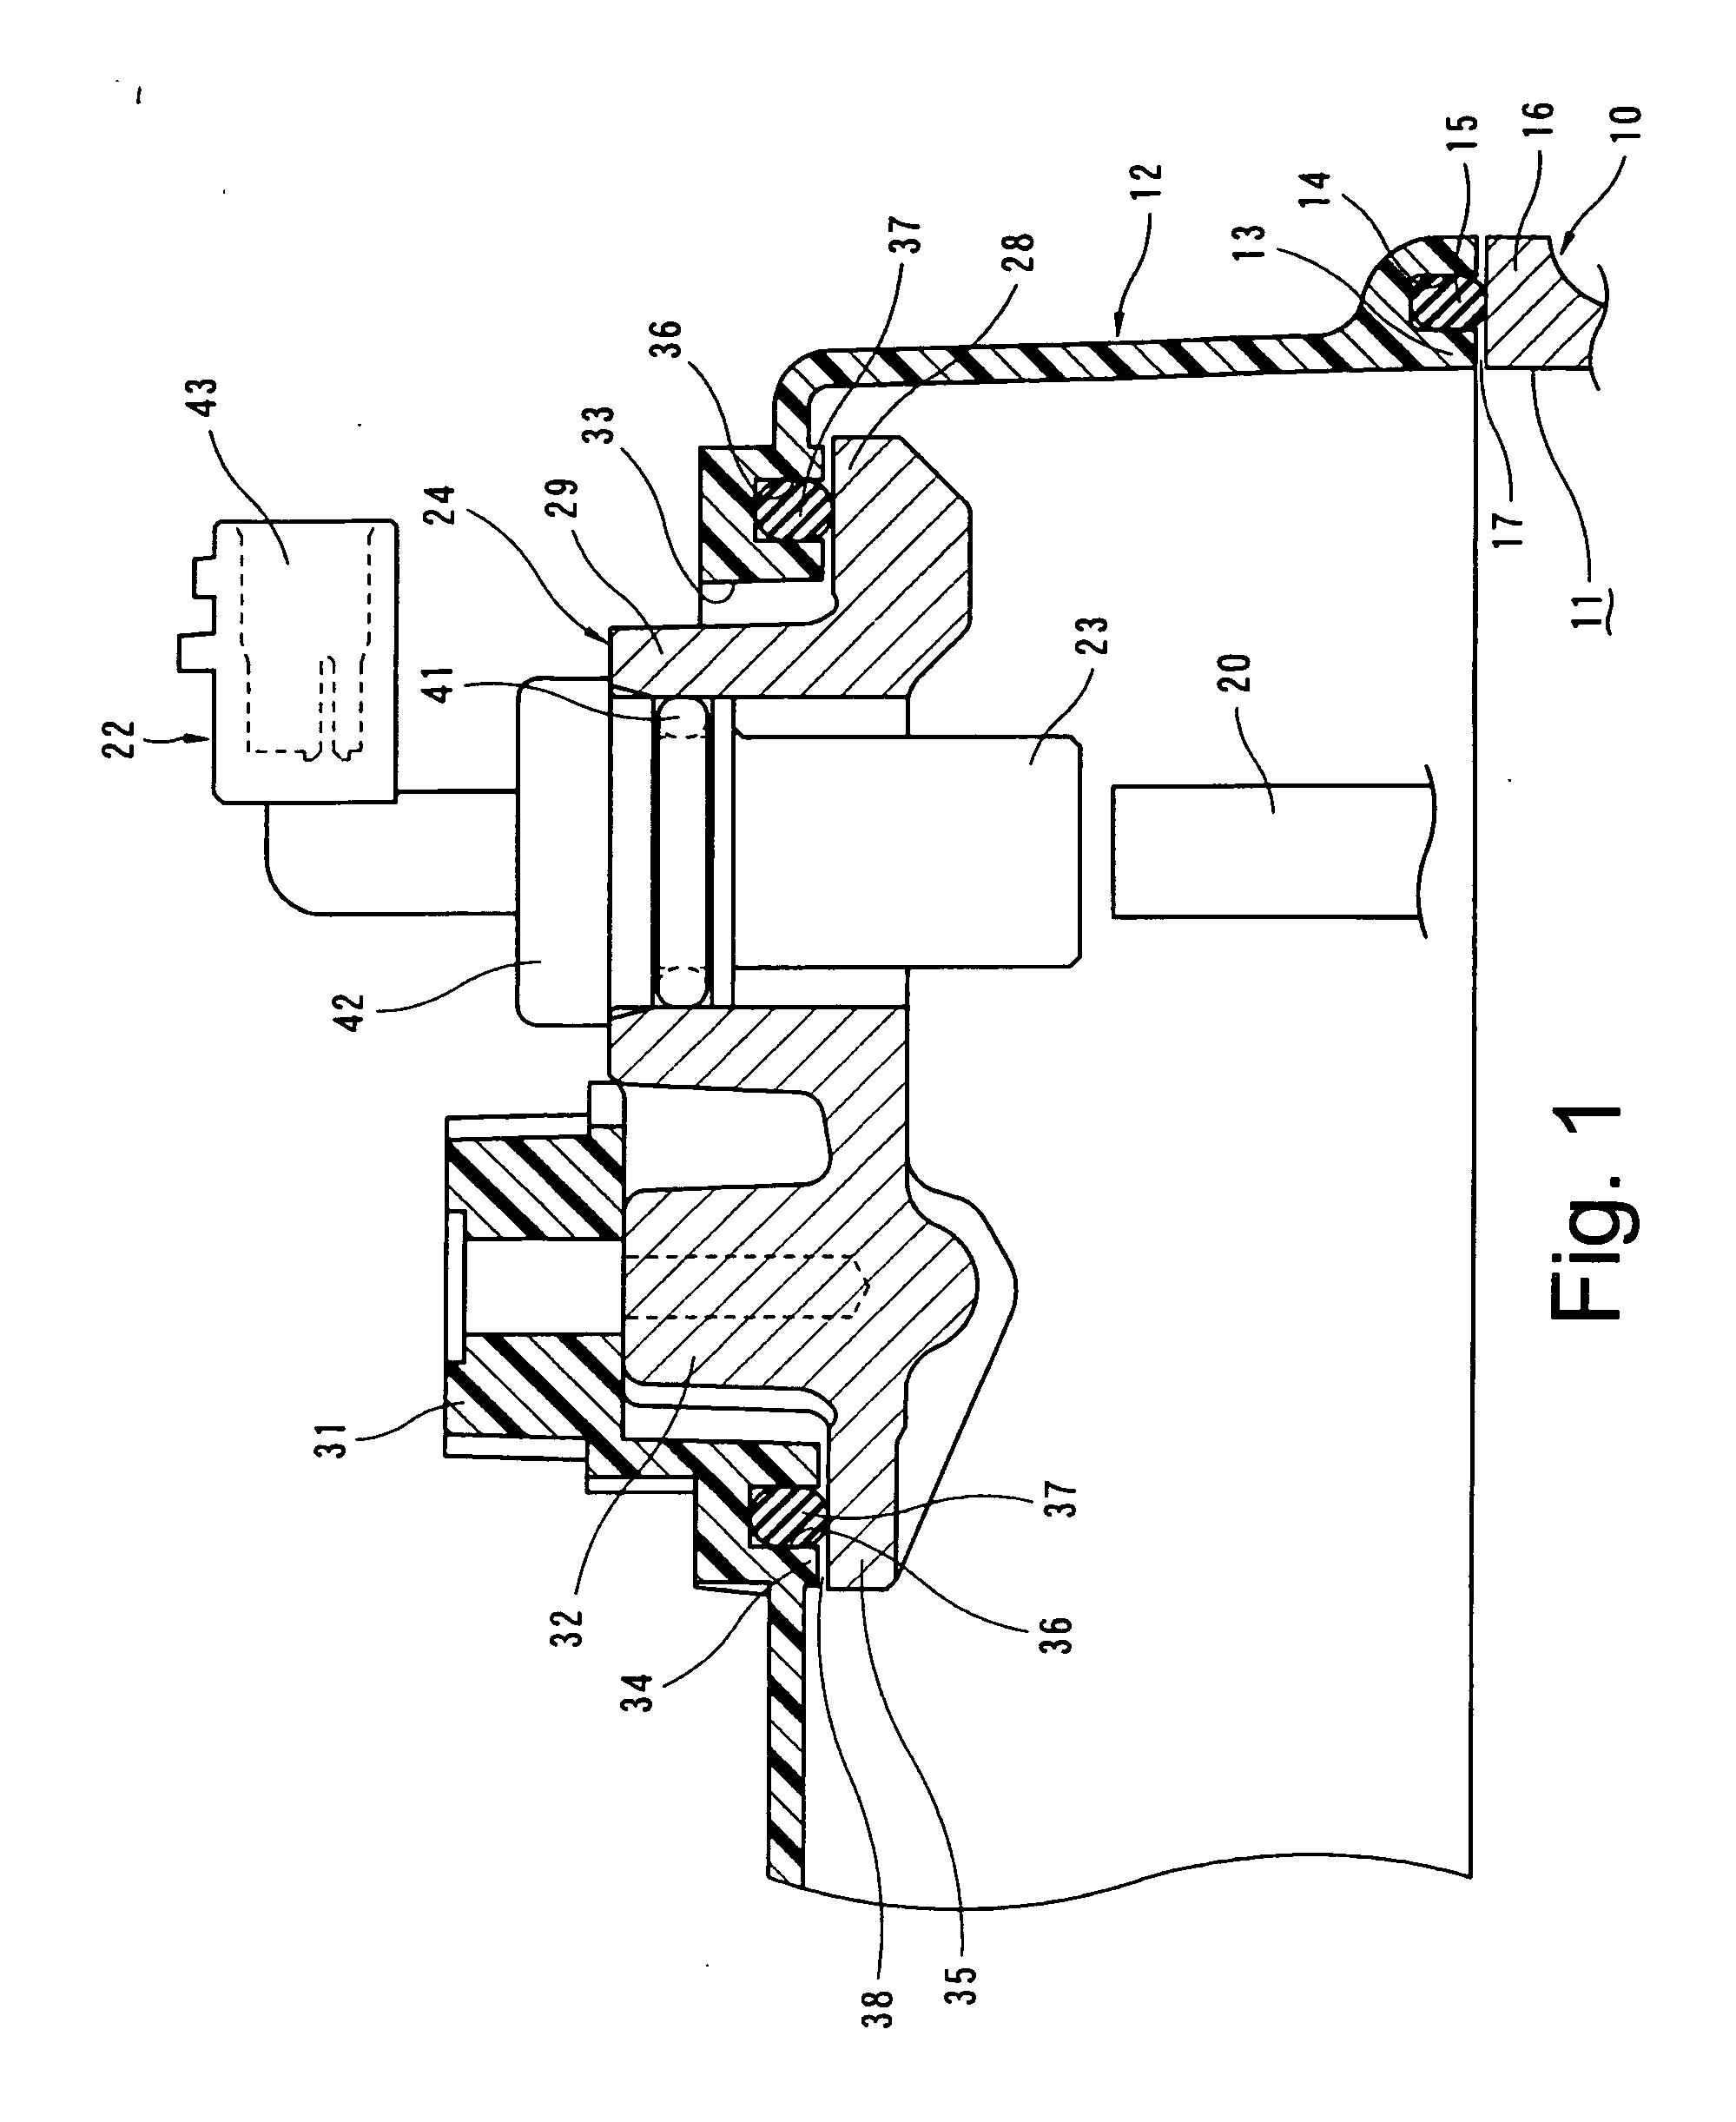 Cam angle sensor mounting structure